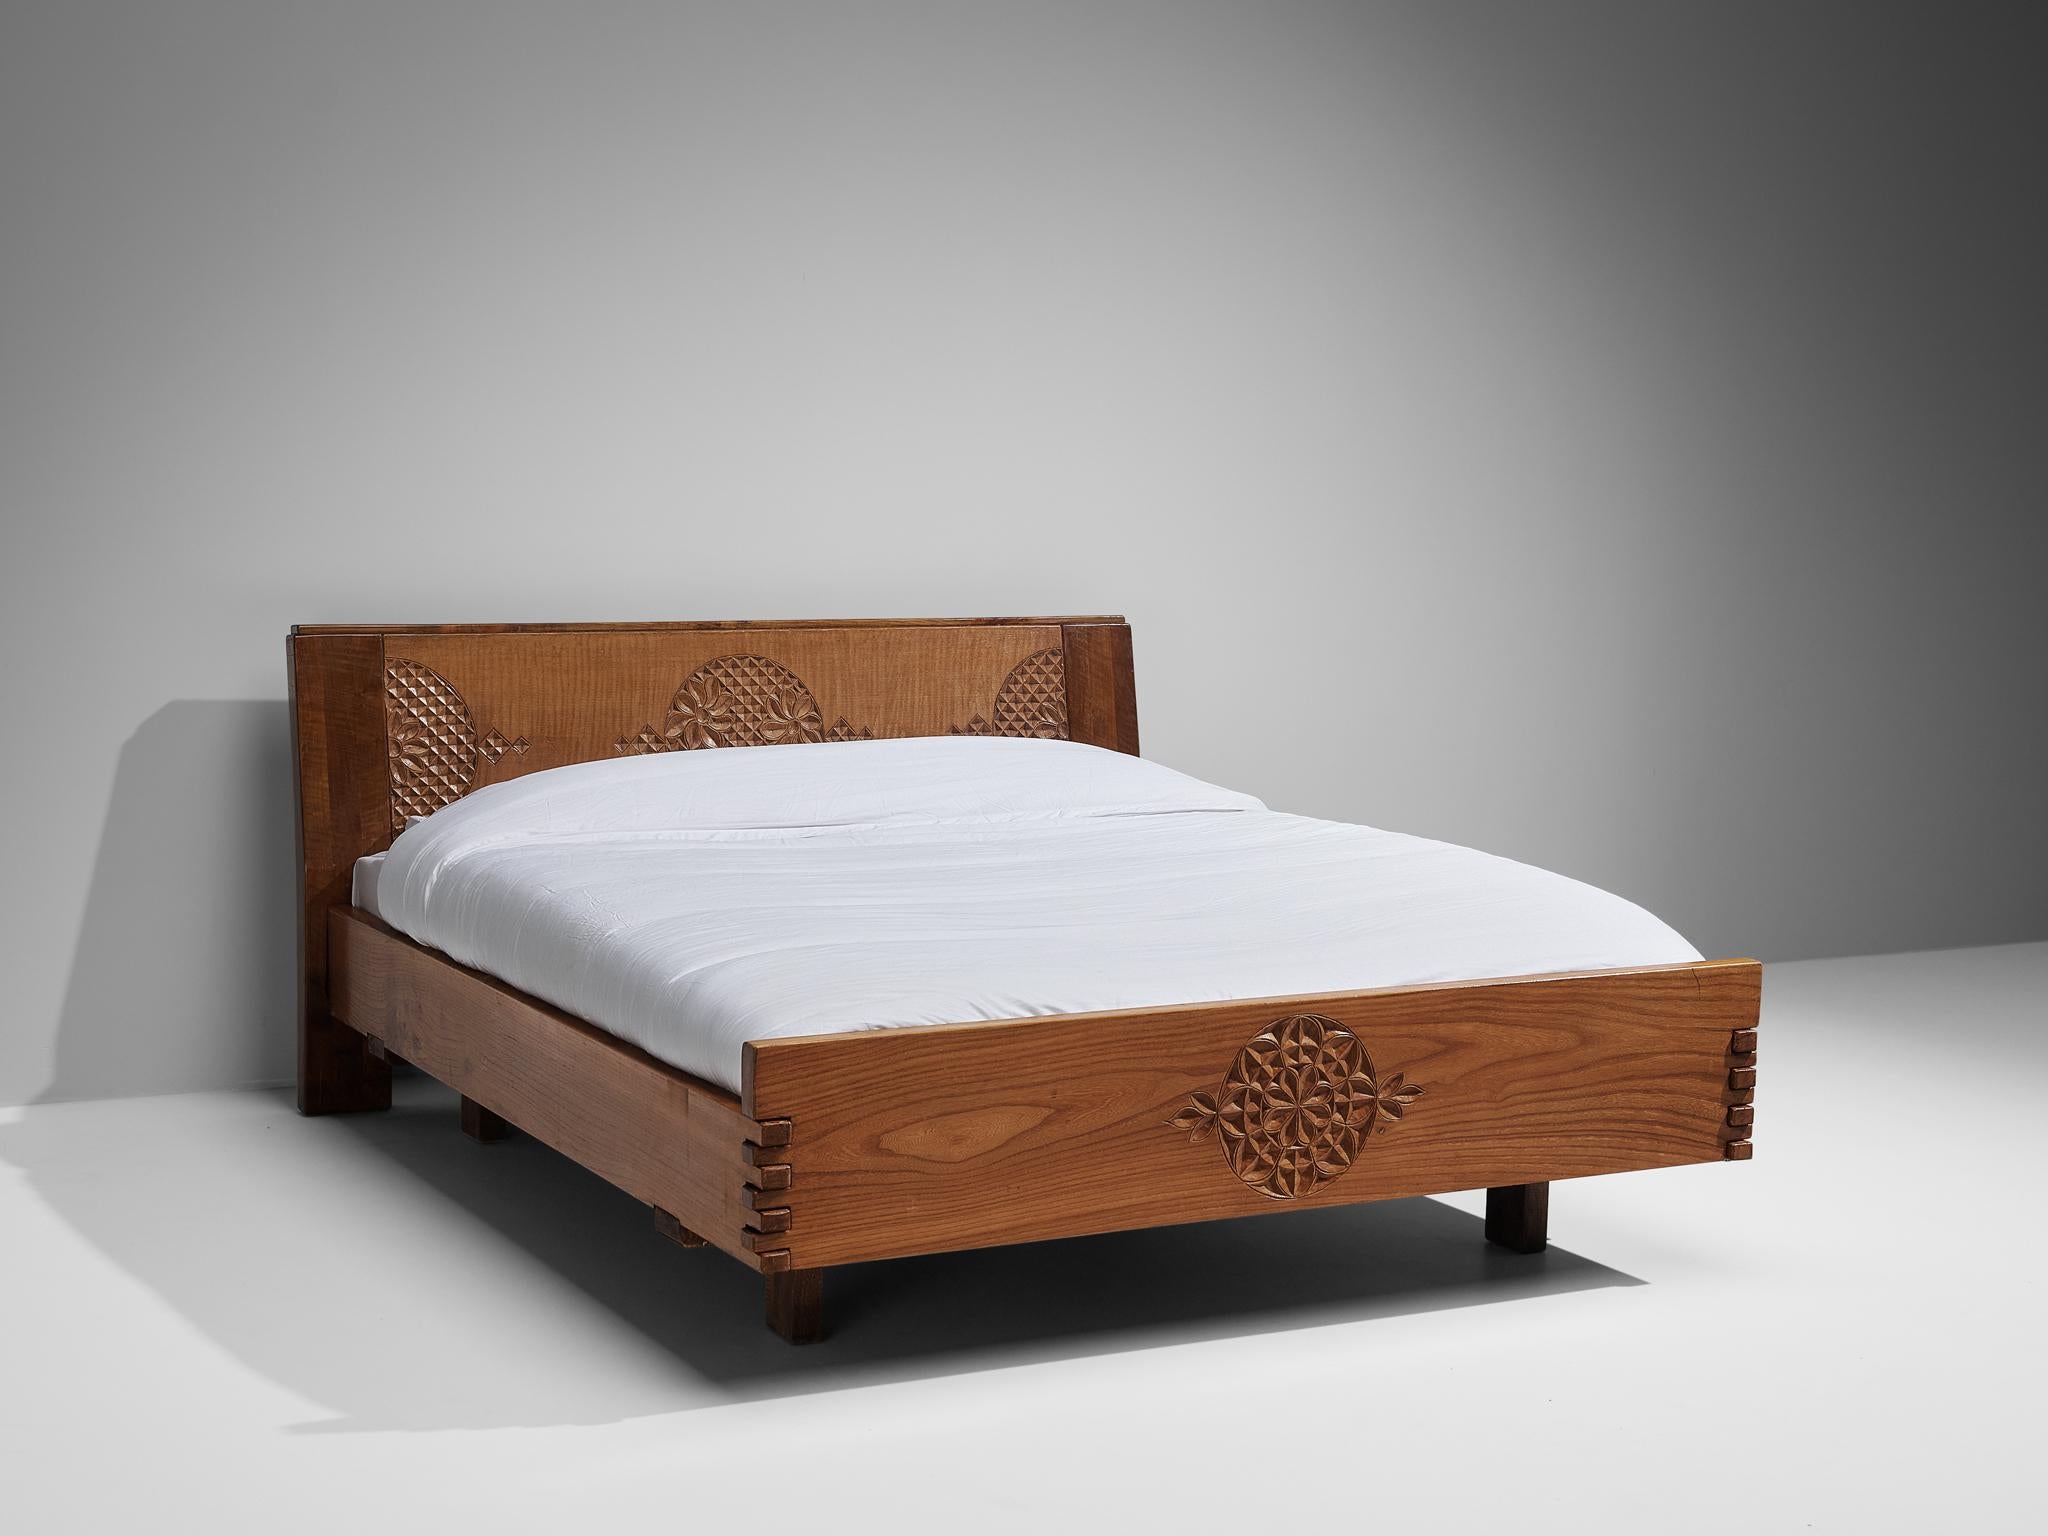 Giuseppe Rivadossi for Officina Rivadossi, king bed, walnut, Italy, circa 1980.

Giuseppe Rivadossi once again proves his great eye for materialization and technicality this bed is exemplary for. The bed is constructed using wooden panels secured